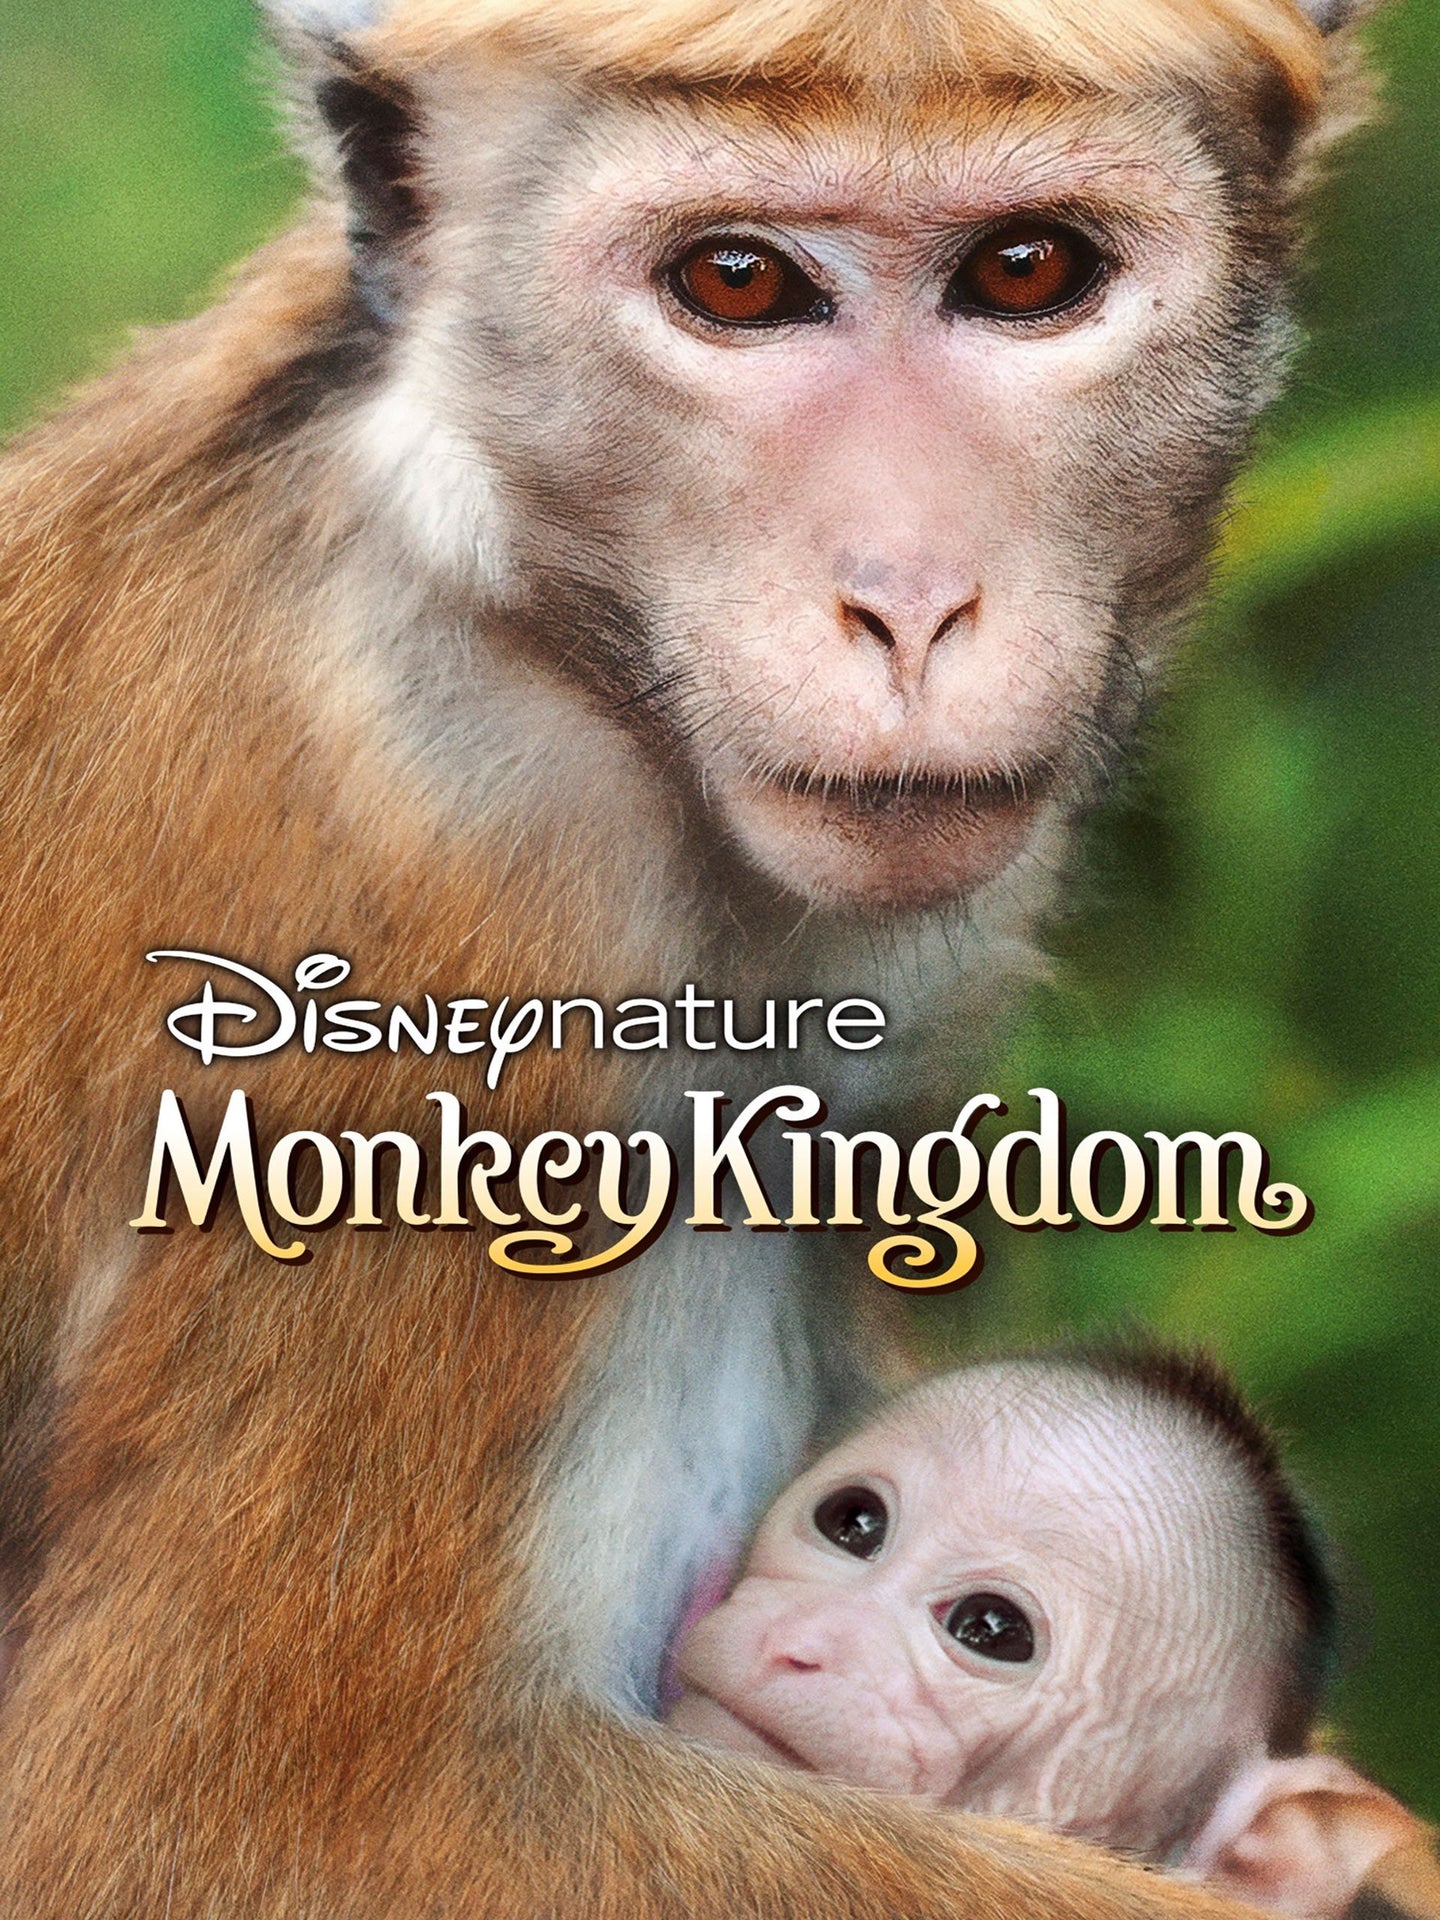 Disney Nature’s Monkey Kingdom (2015) Vudu or Movies Anywhere HD redemption only